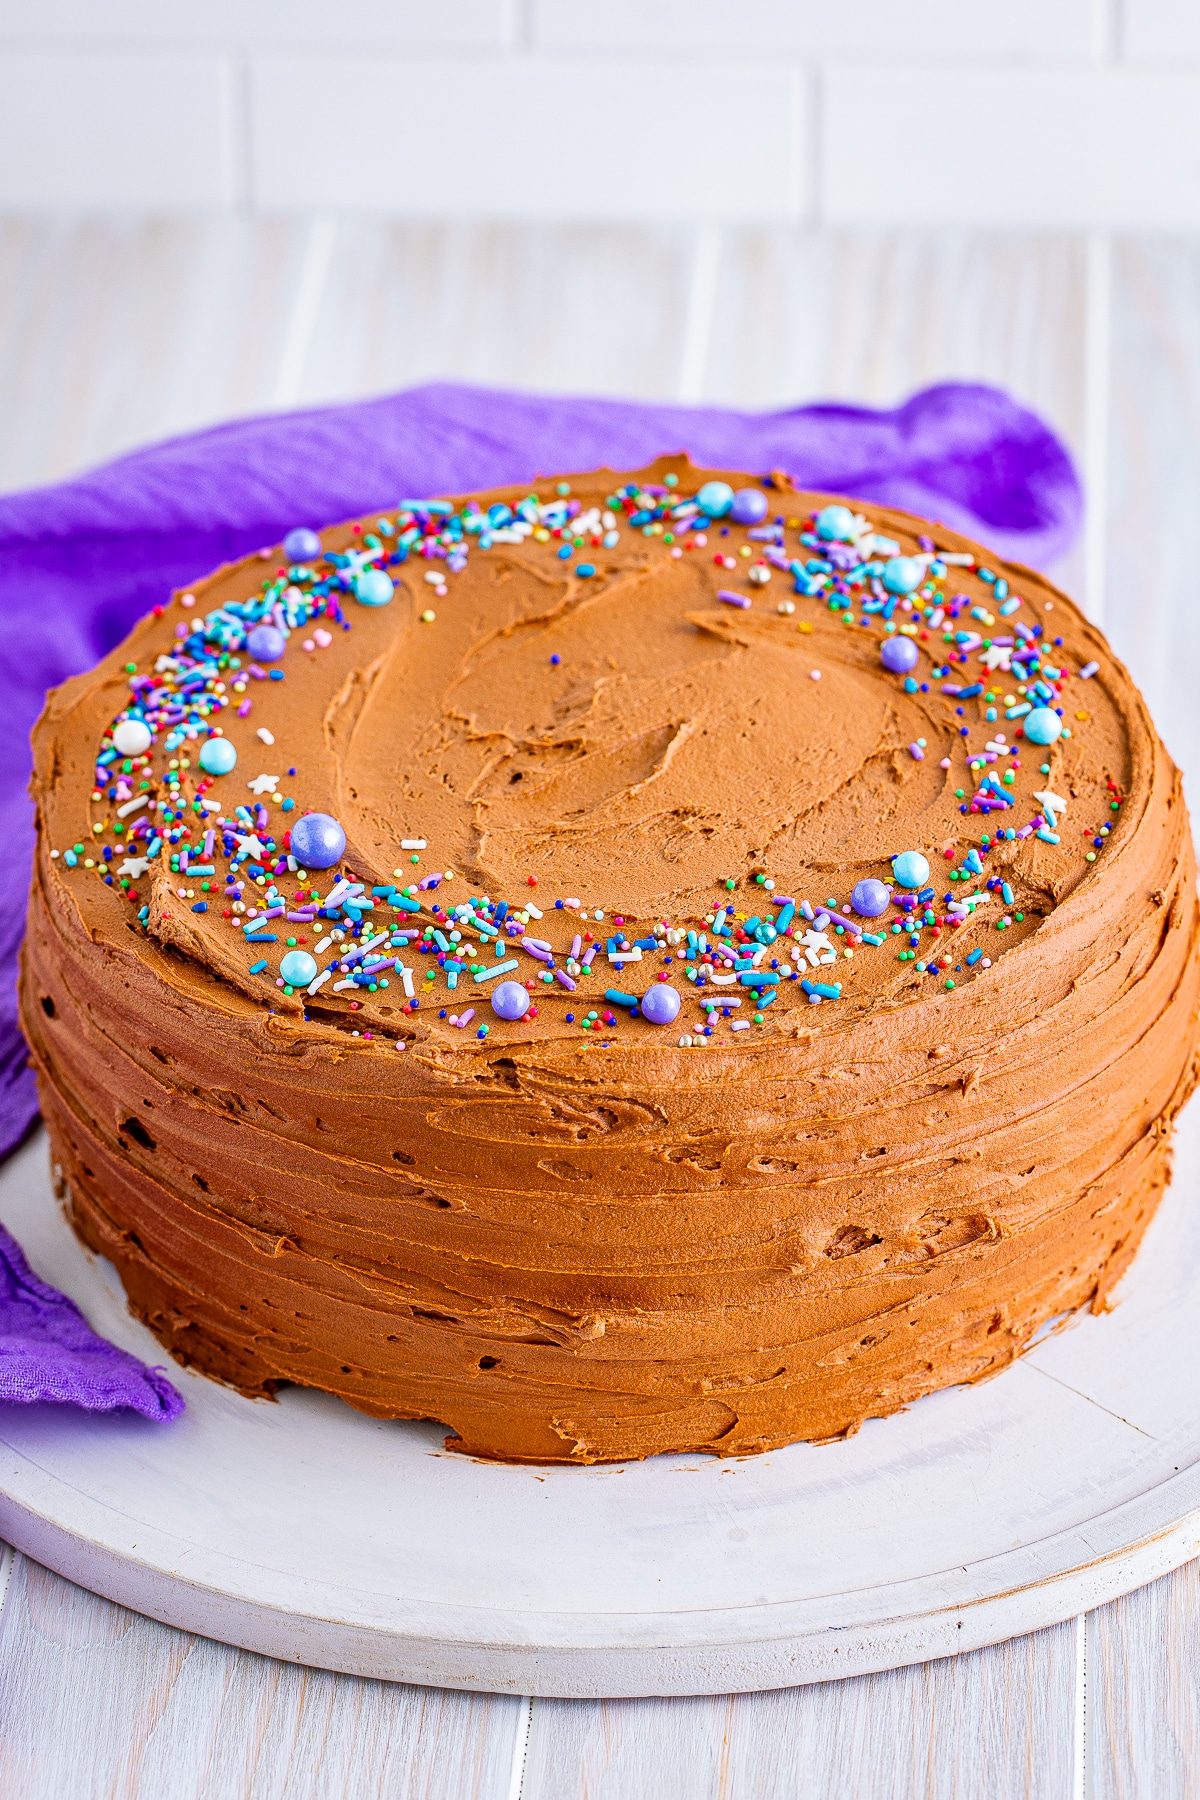 decorating yellow cake with chocolate frosting